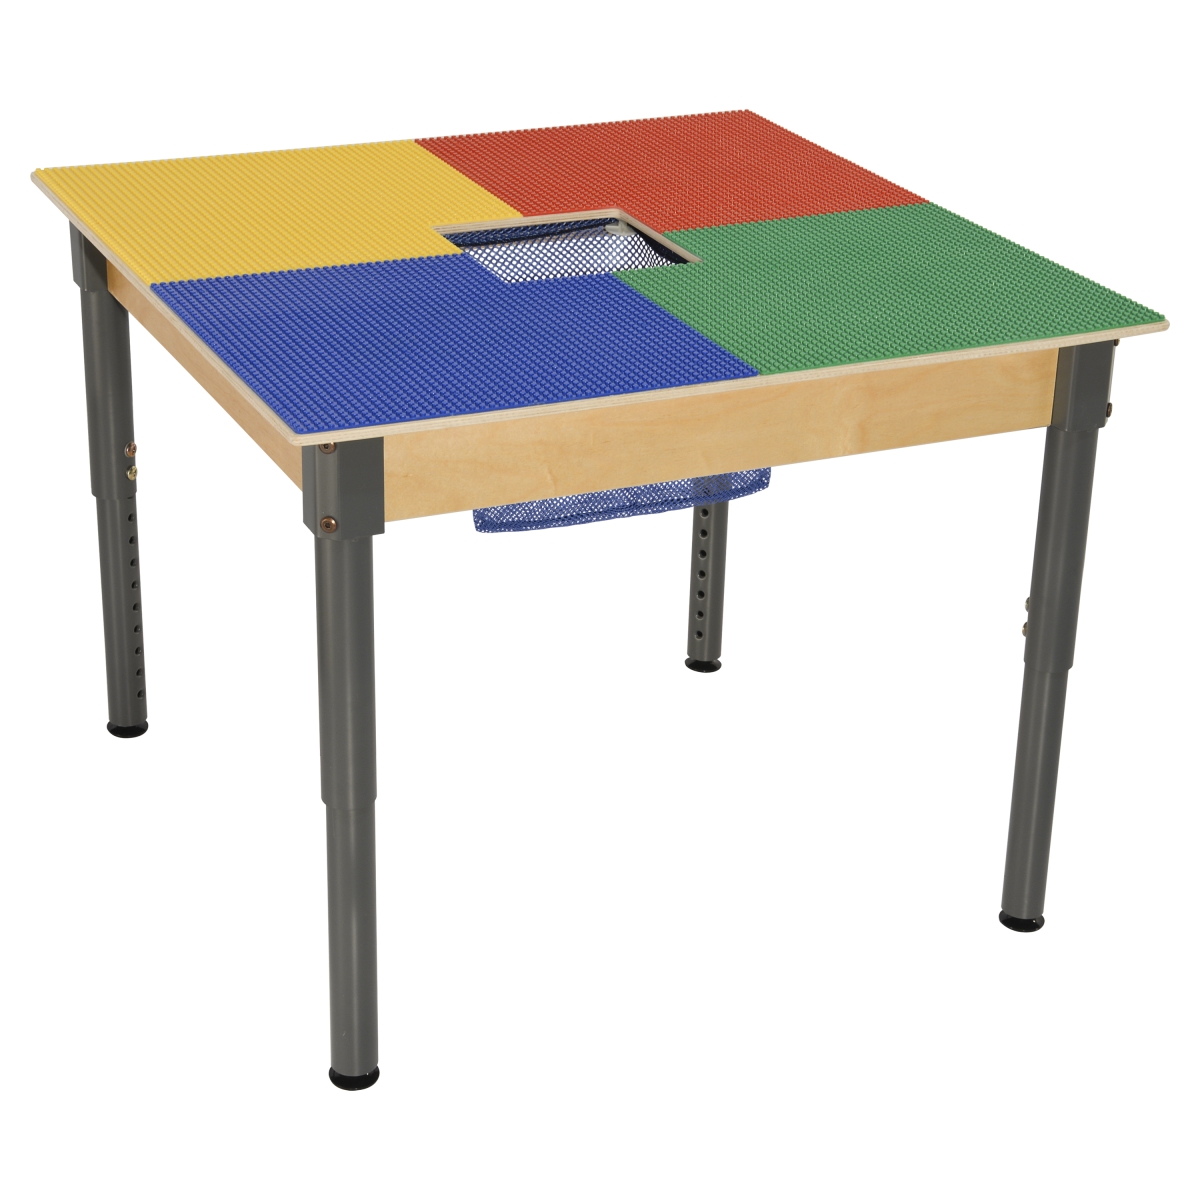 Tp3131sgna1217 12 X 17 In. Lego Compatible Square Table With Adjustable Legs, Multi Color